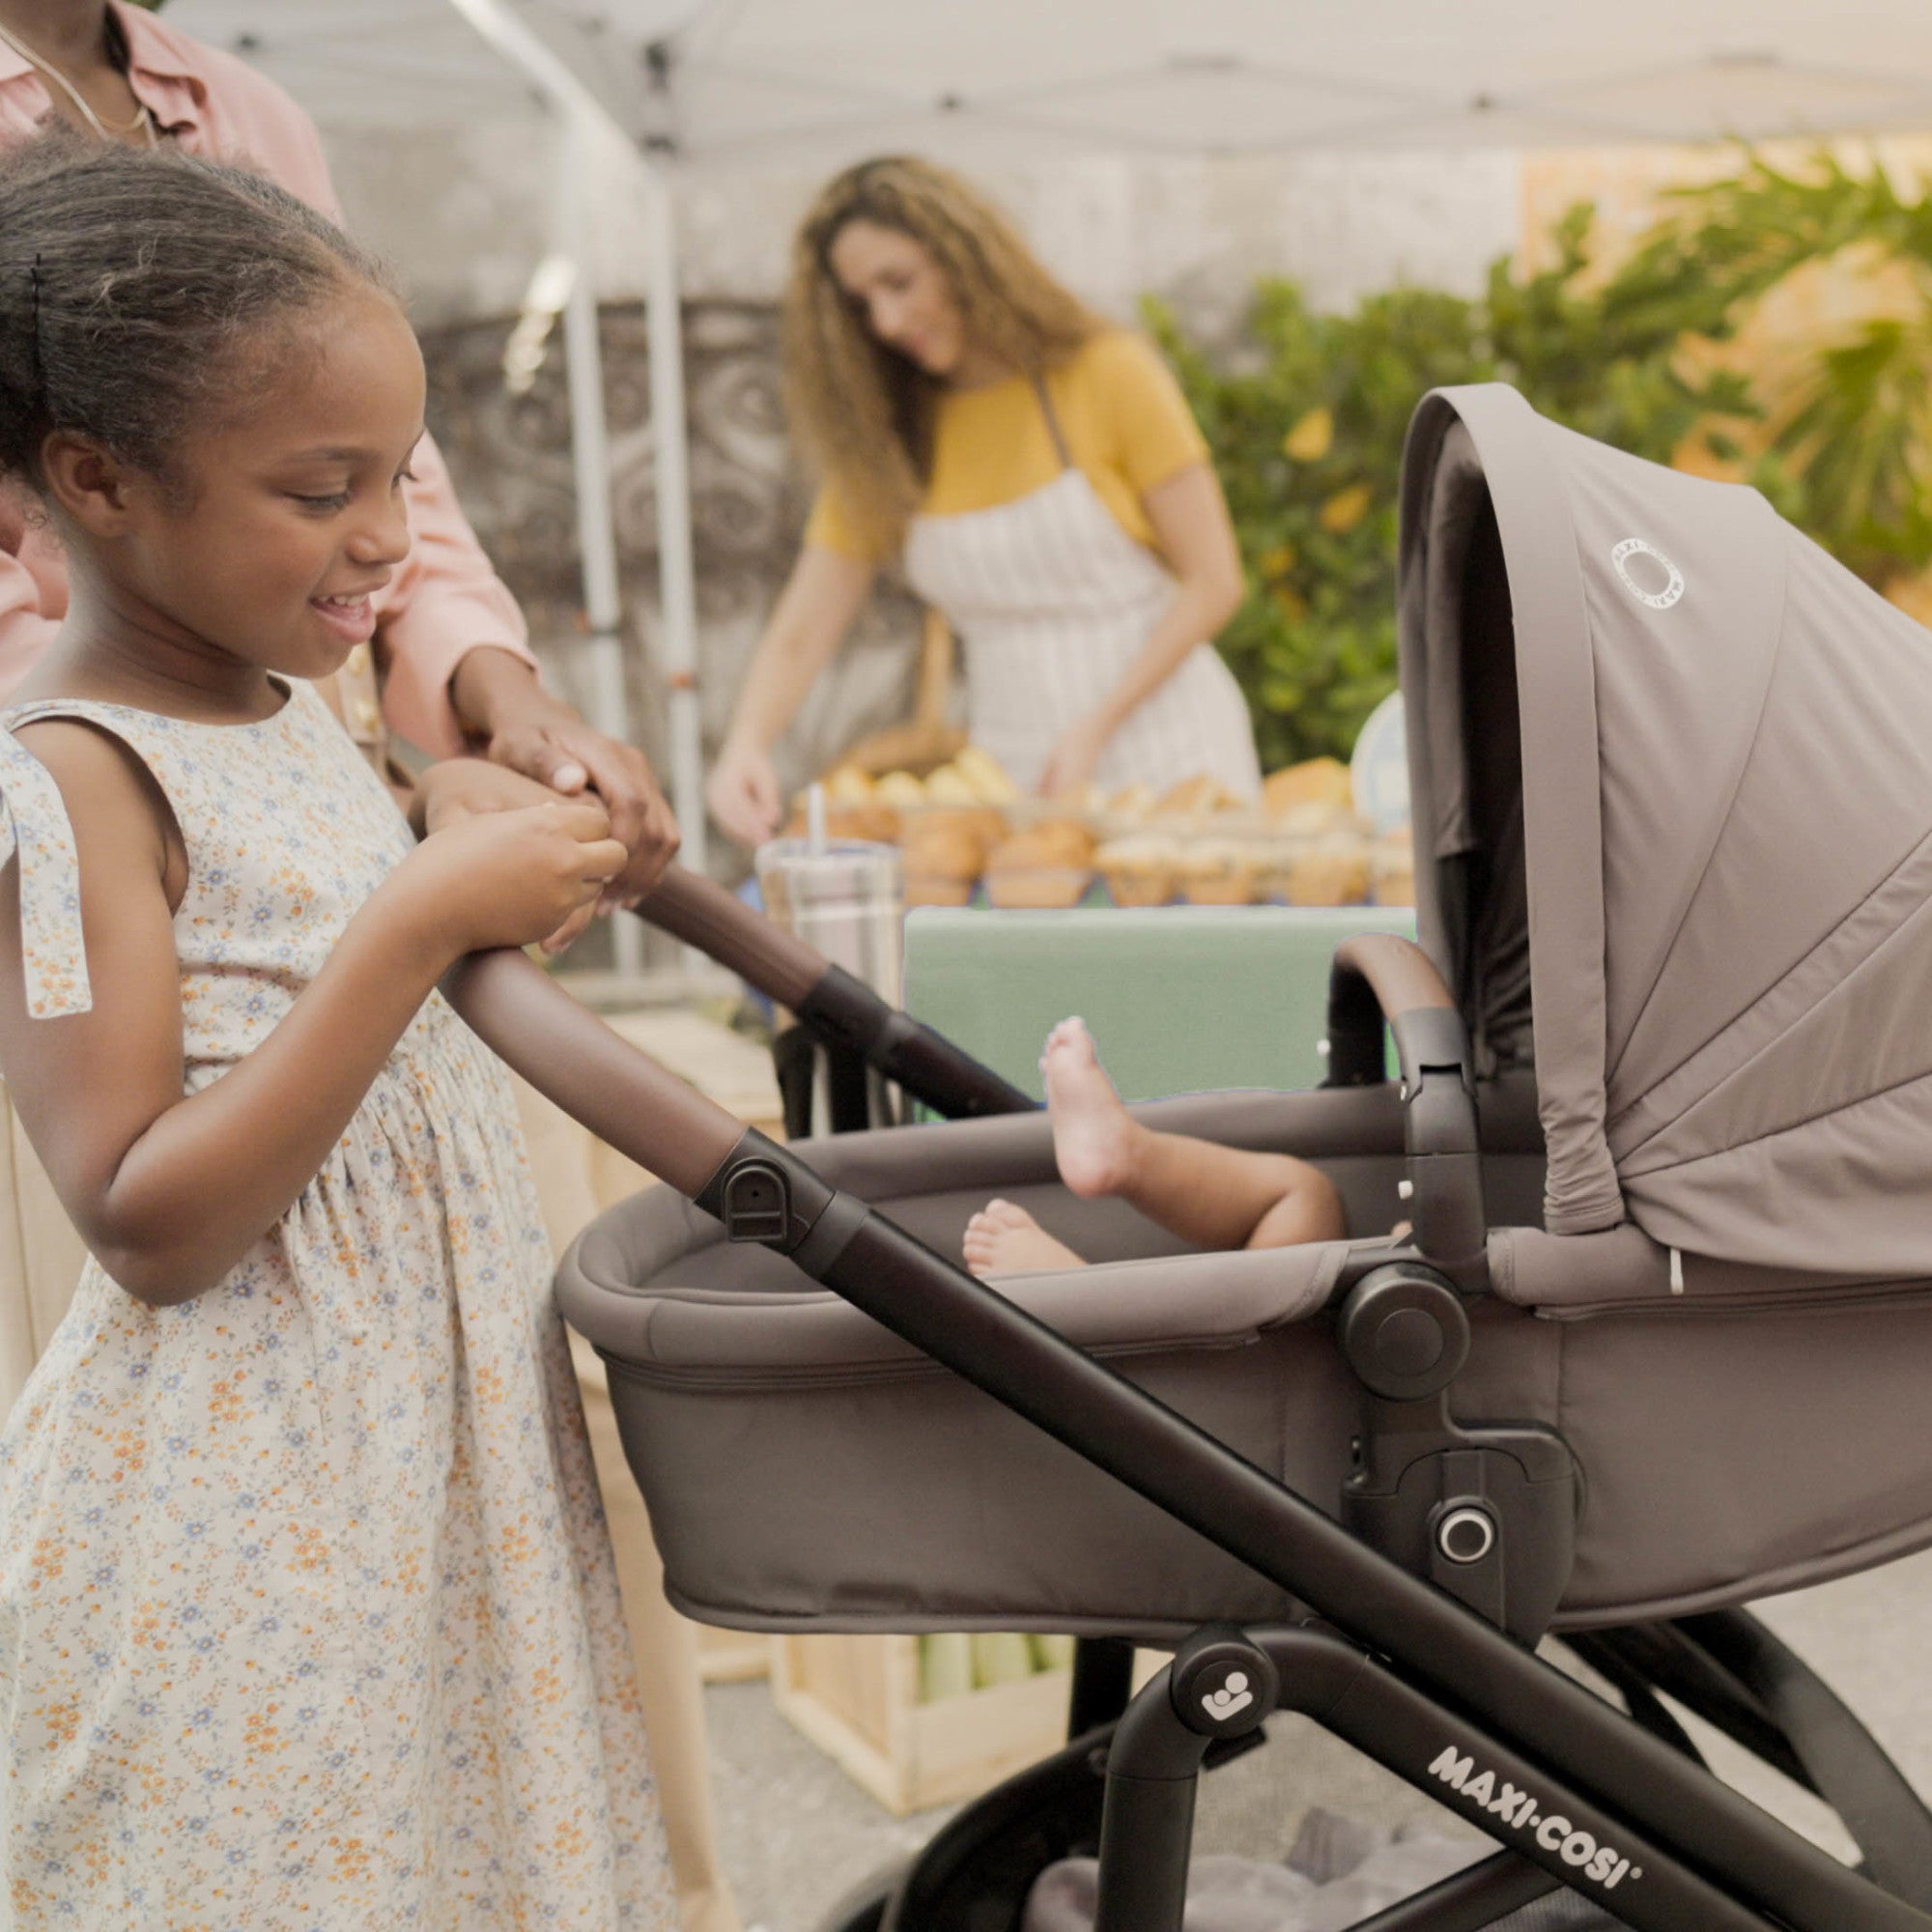 Tayla™ Max Travel System - girl looking at baby with Tayla Max in carriage mode